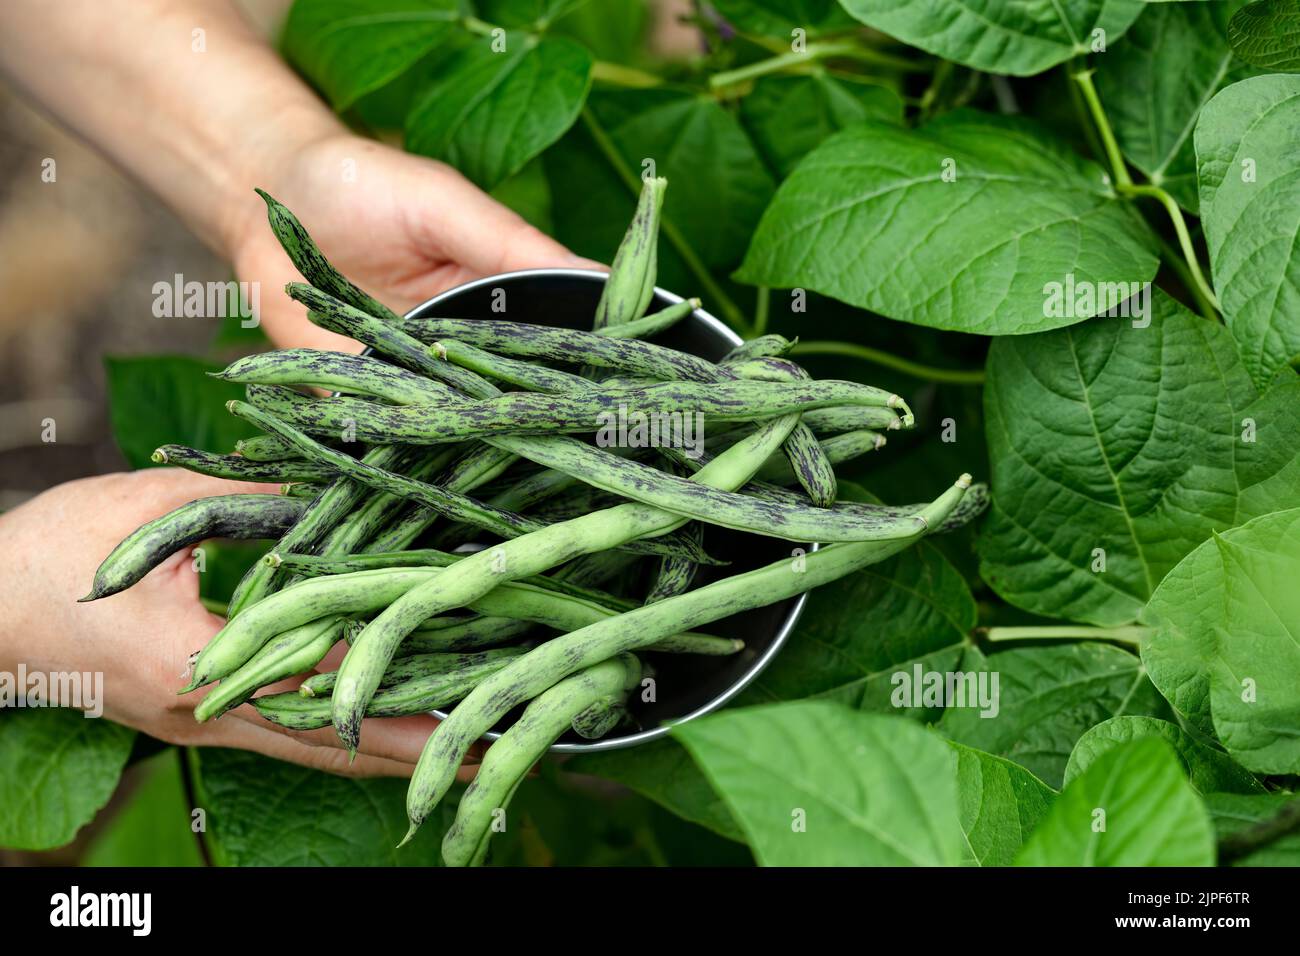 Hands holding stainless steel bowl filled with freshly harvested green pole beans from garden Stock Photo